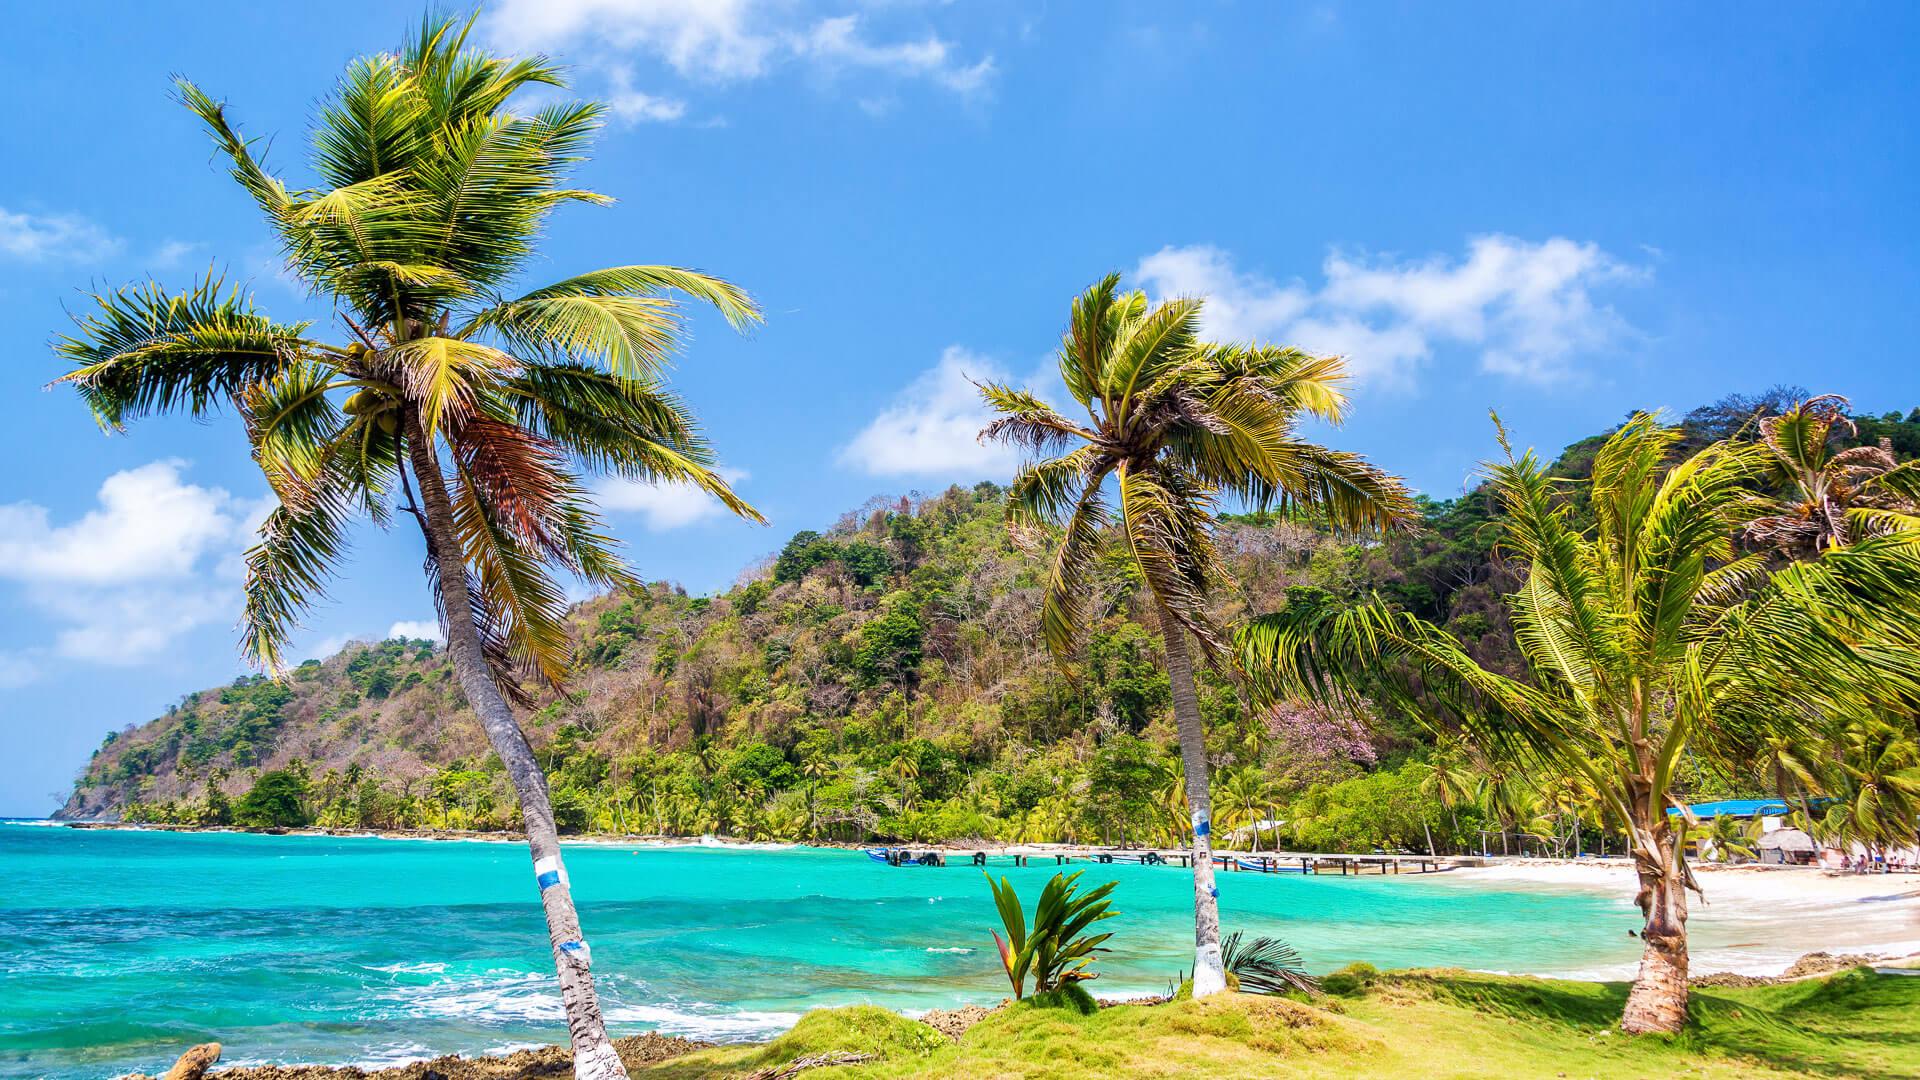 Three palm trees lined up next to the turquoise Caribbean Sea in La Miel, Panama.